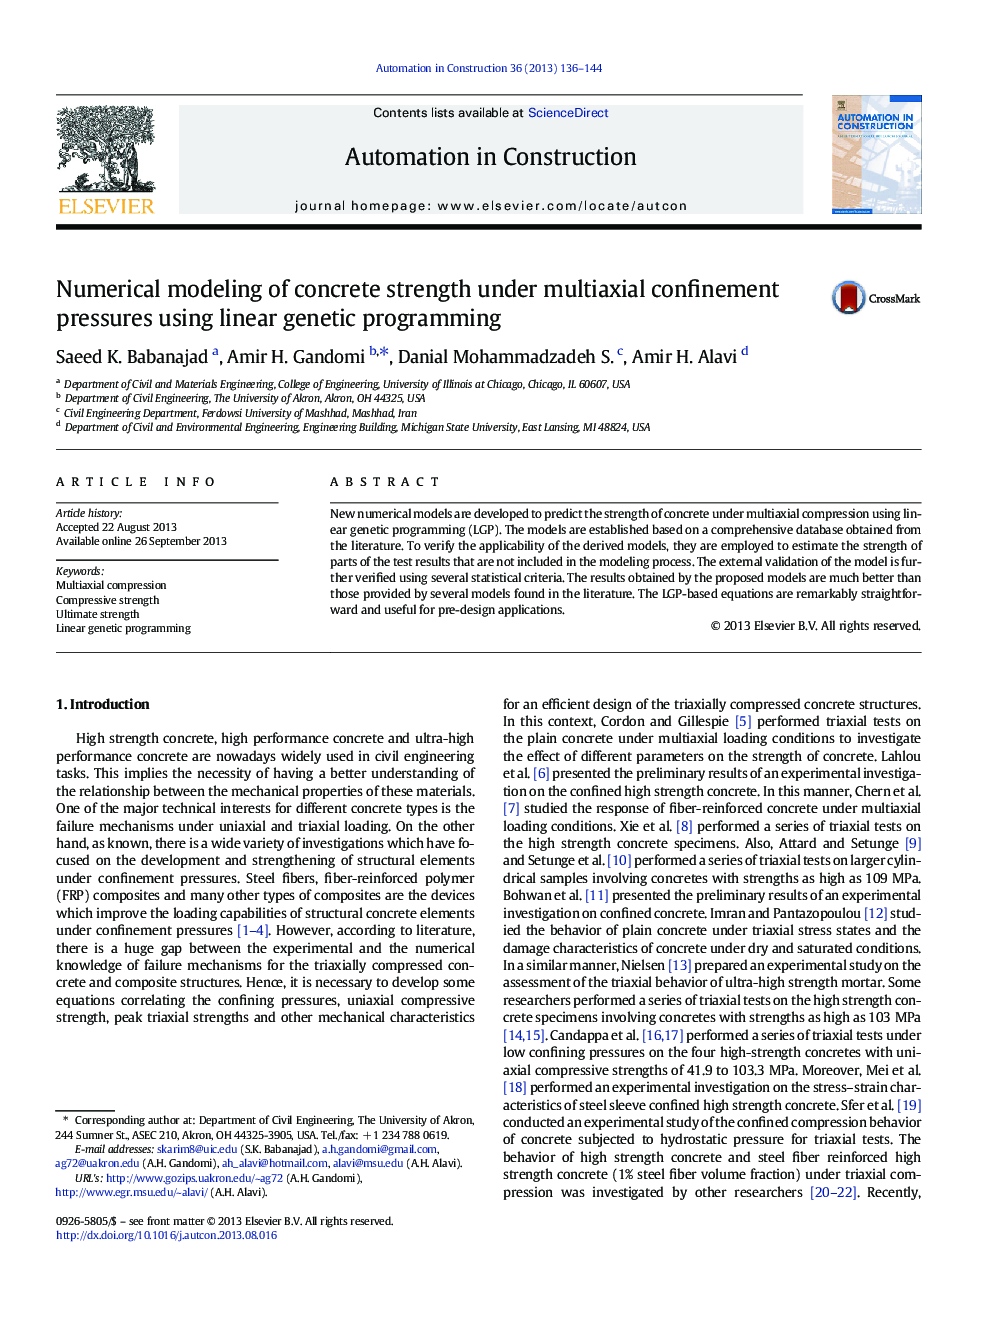 Numerical modeling of concrete strength under multiaxial confinement pressures using linear genetic programming